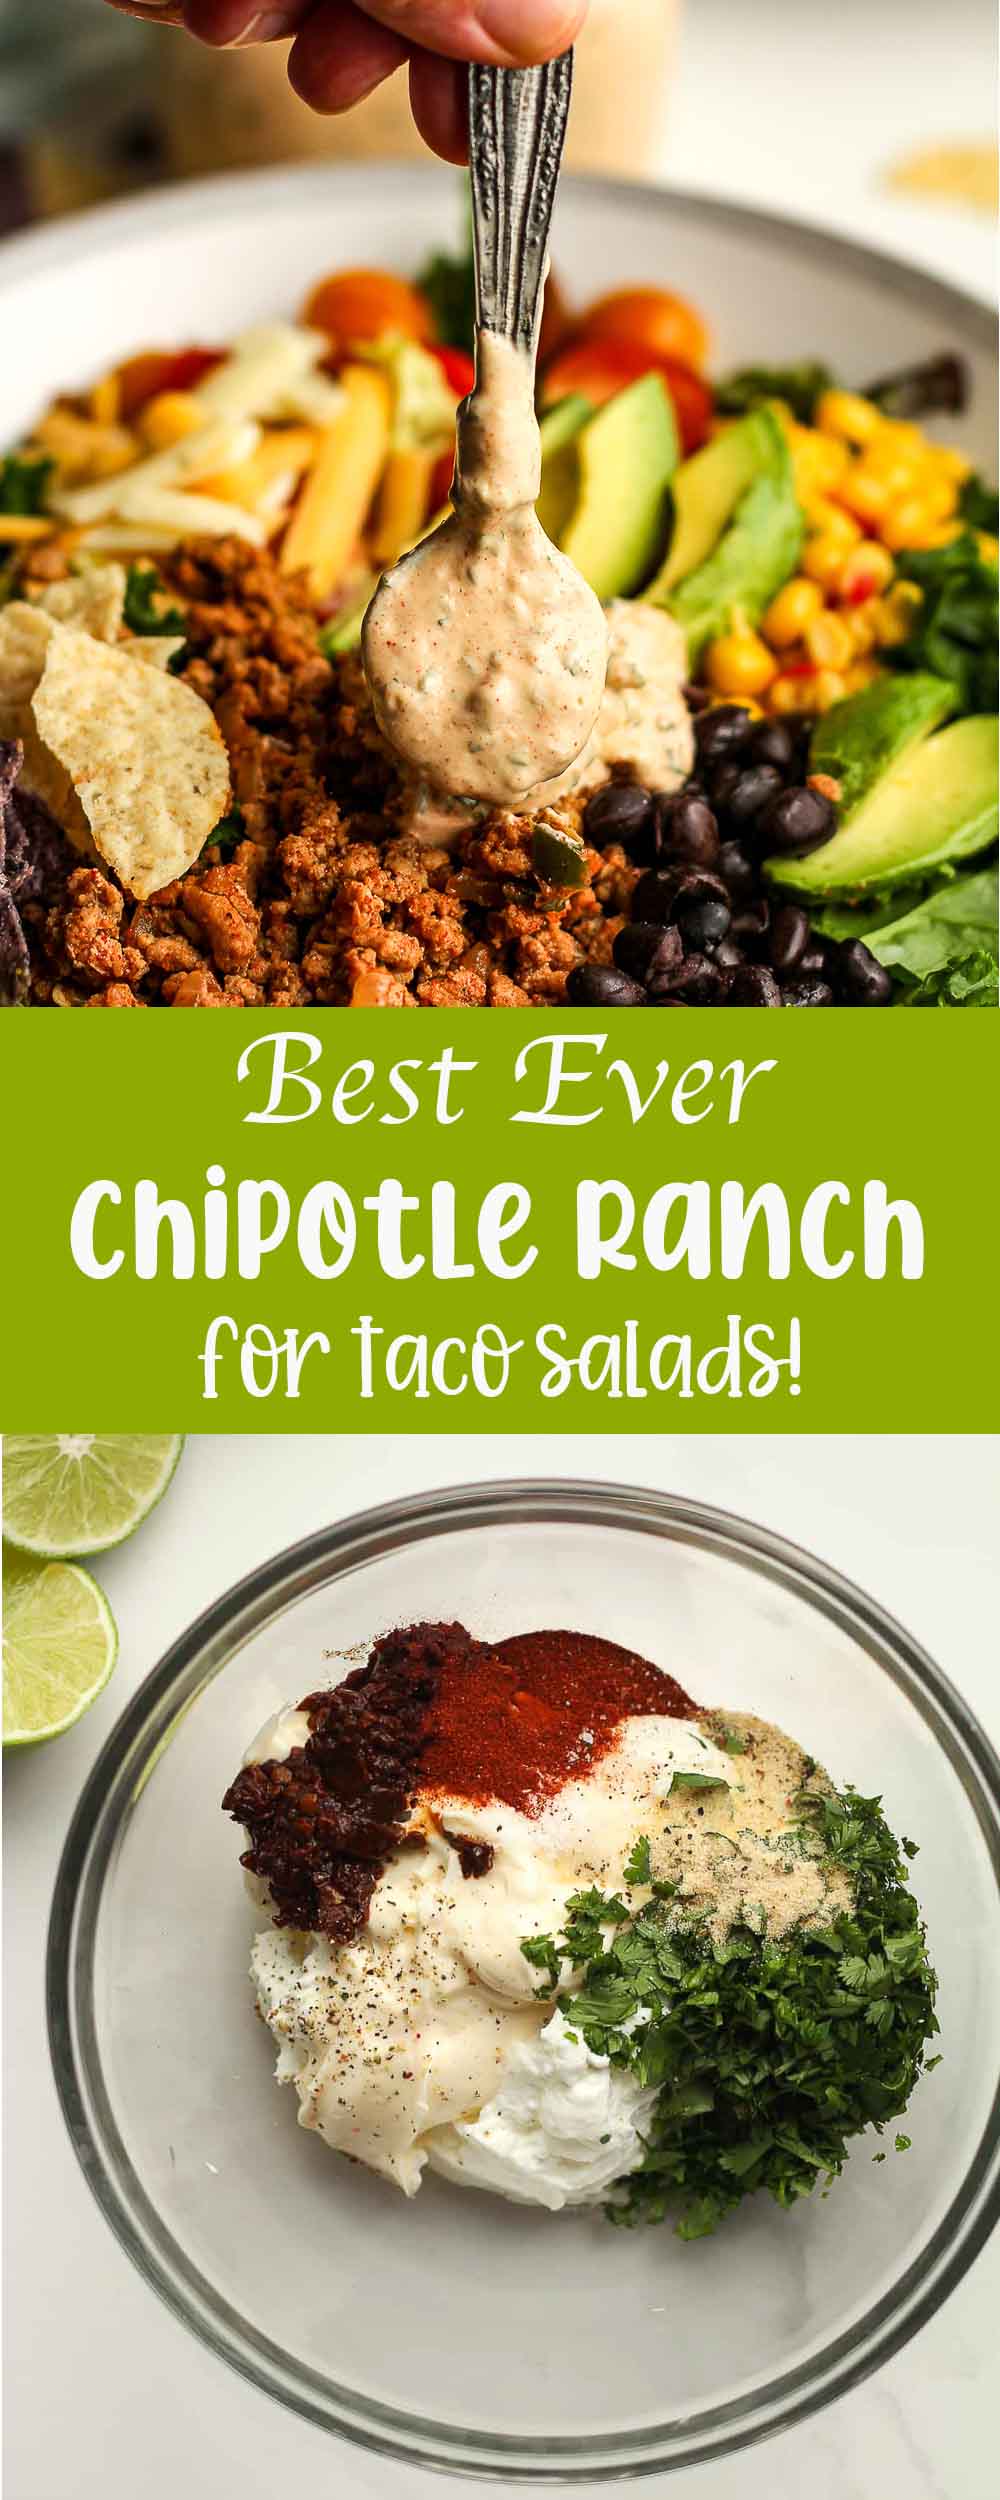 Two photos for the best ever chipotle ranch for taco salads.